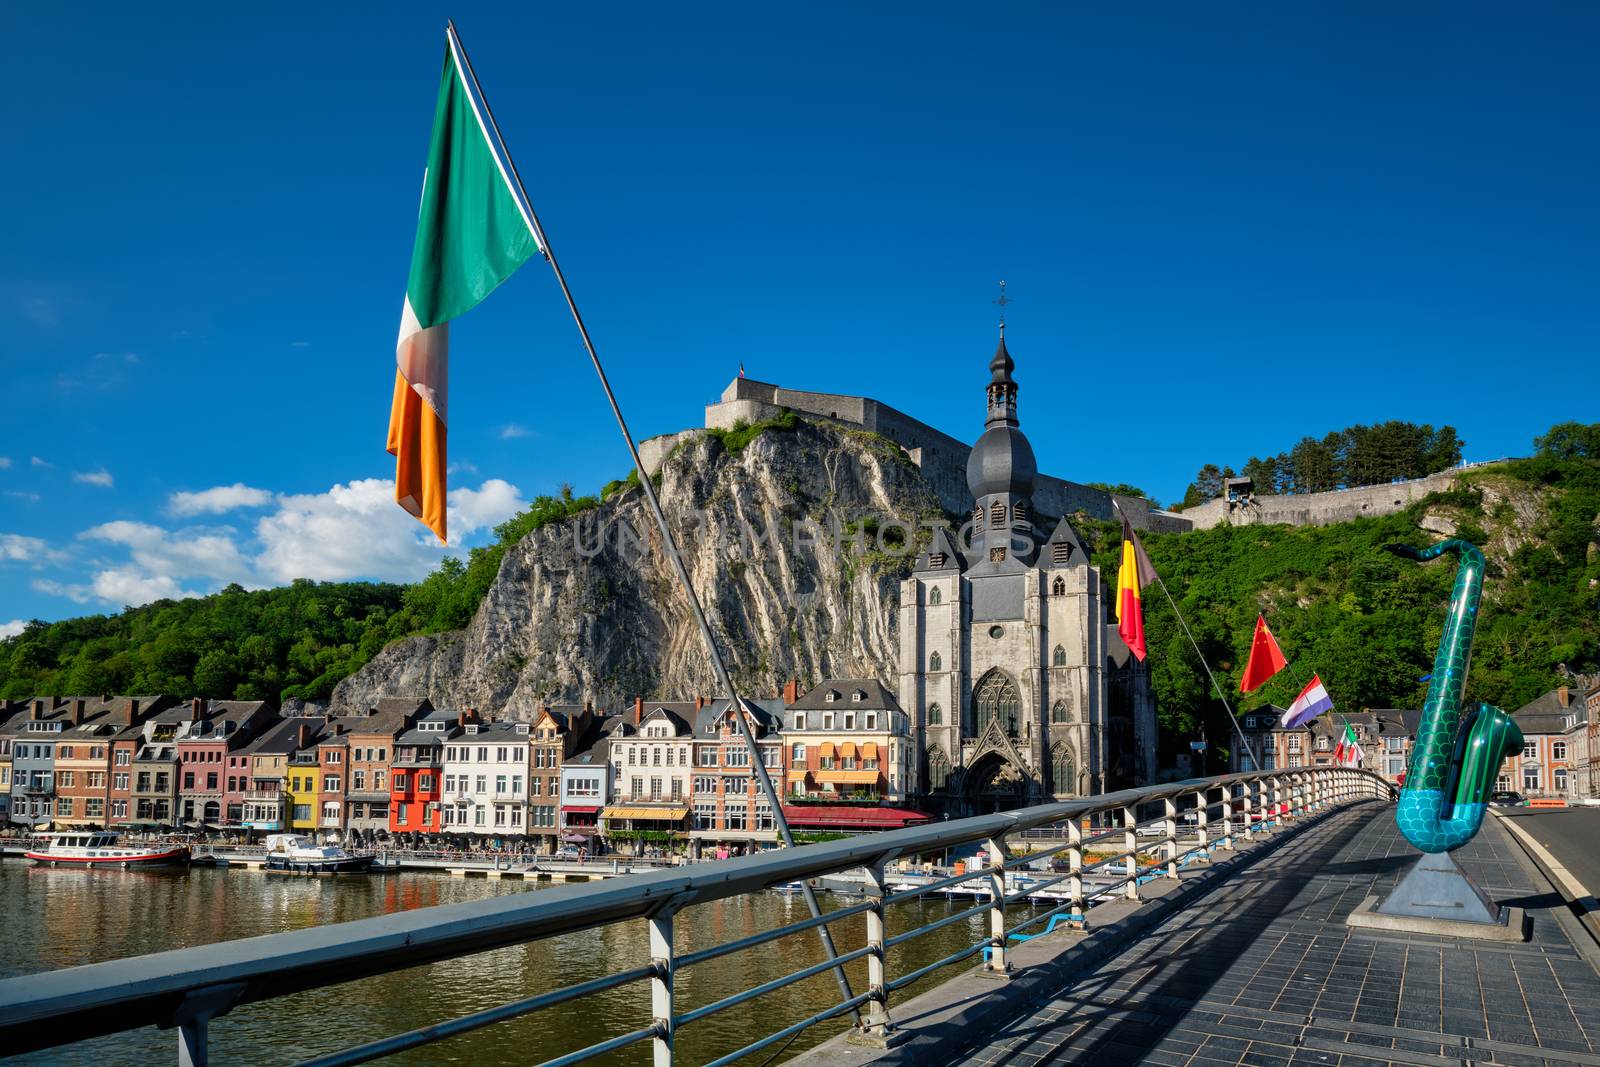 Picturesque Dinant town, Dinant Citadel and Collegiate Church of Notre Dame de Dinant and Charles de Gaulle bridge with saxophones as Dinant is hometown of saxophone inventor and flags. Namur, Blegium